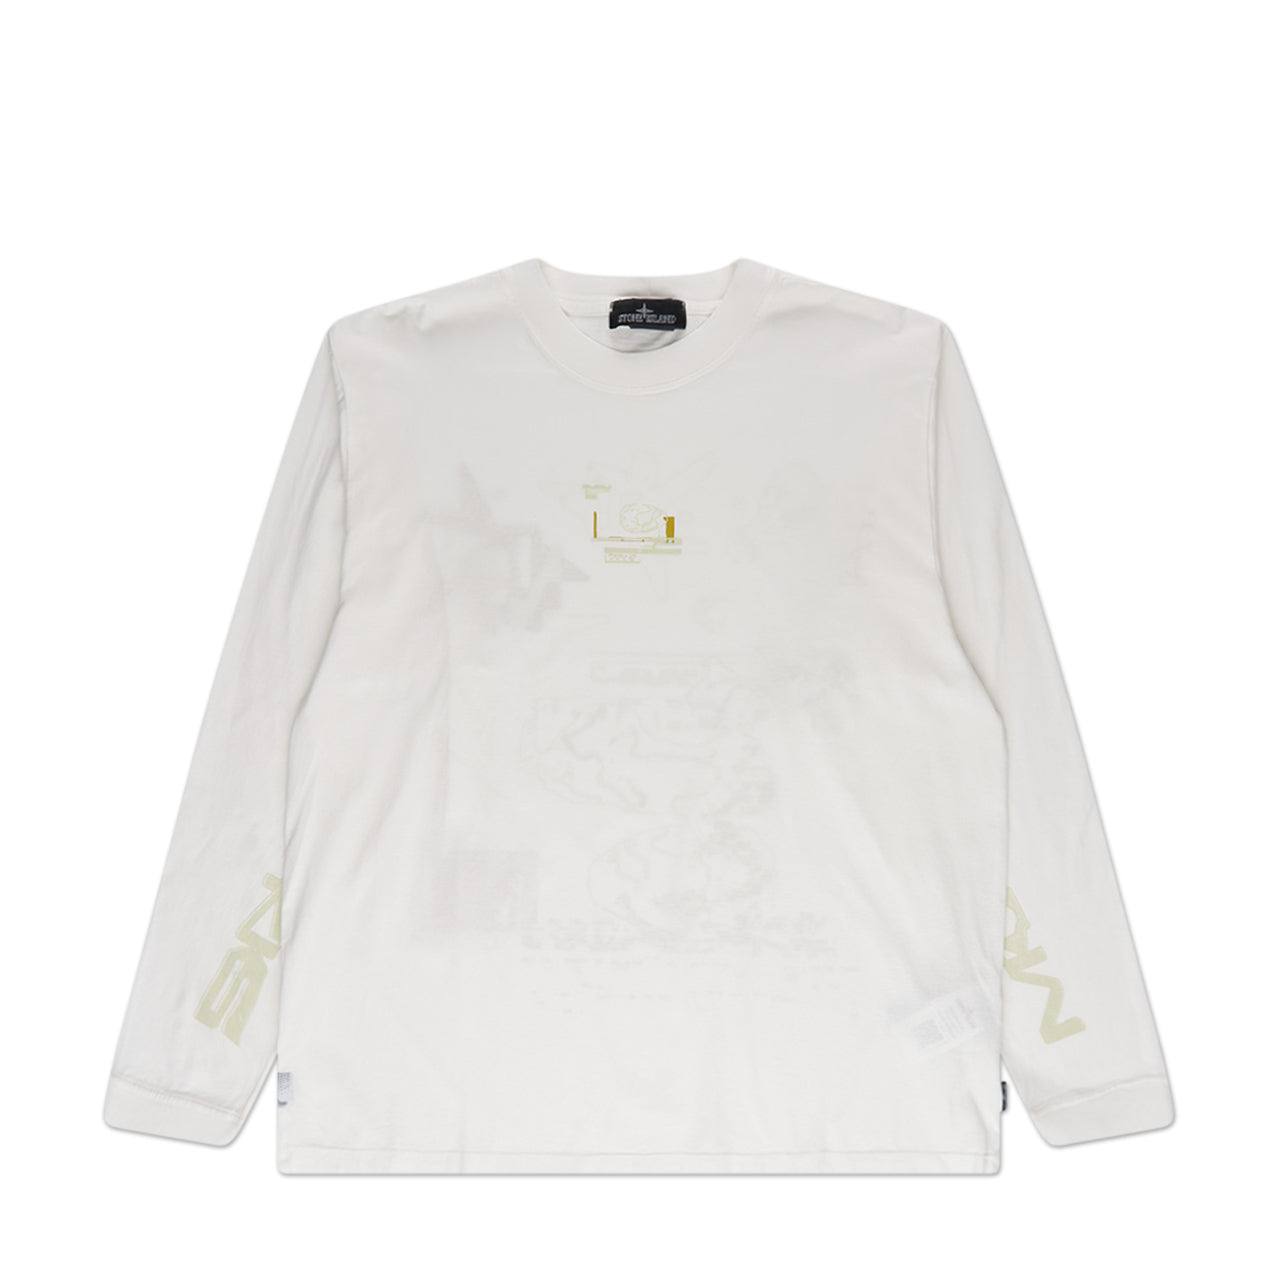 stone island shadow project graphic longsleeve (off white)